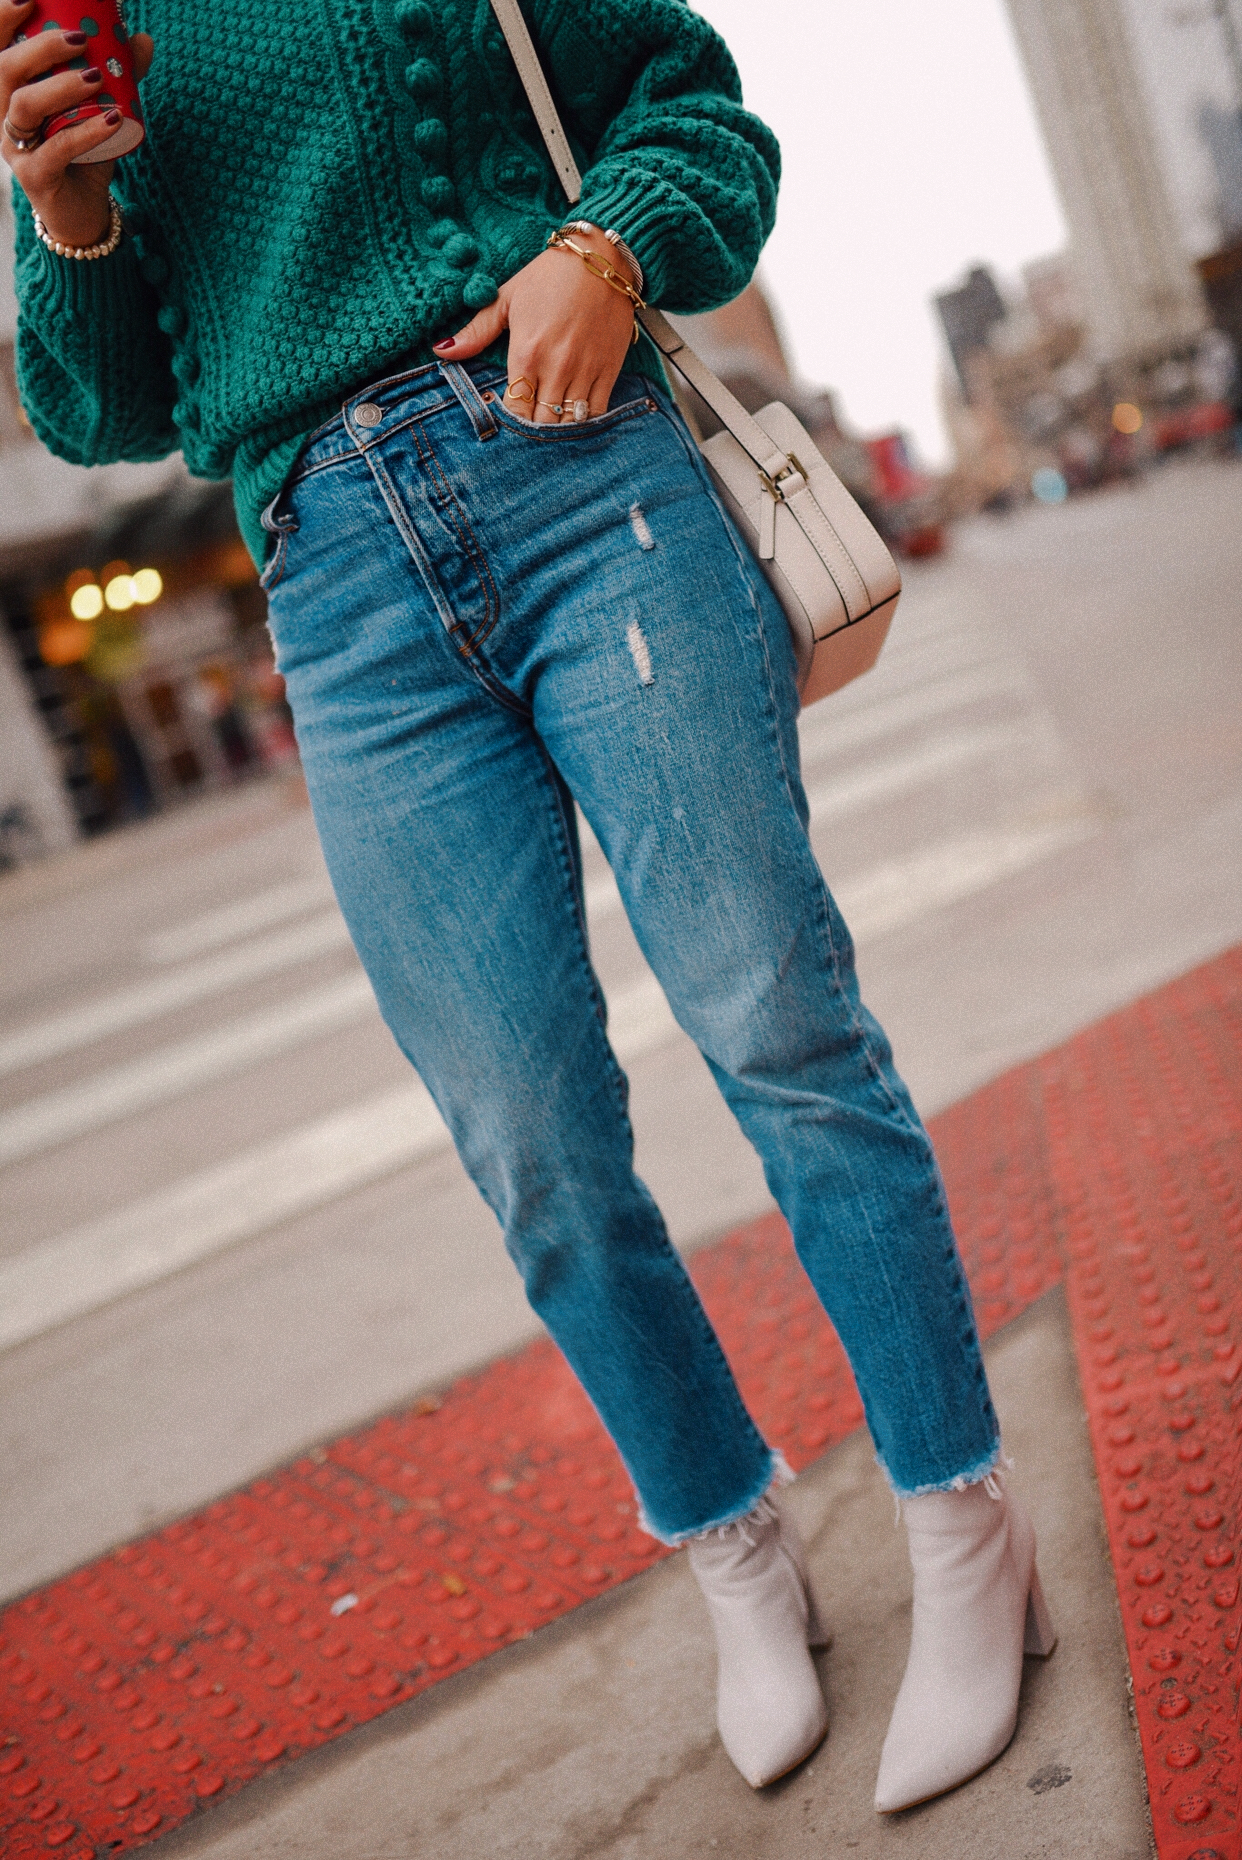 Carolina Hellal of Chic Talk wearing a Sezane green knit sweater, Levi's wedgie jeans, Marc Fisher gray ankle boots and Kate Spade white bag. 